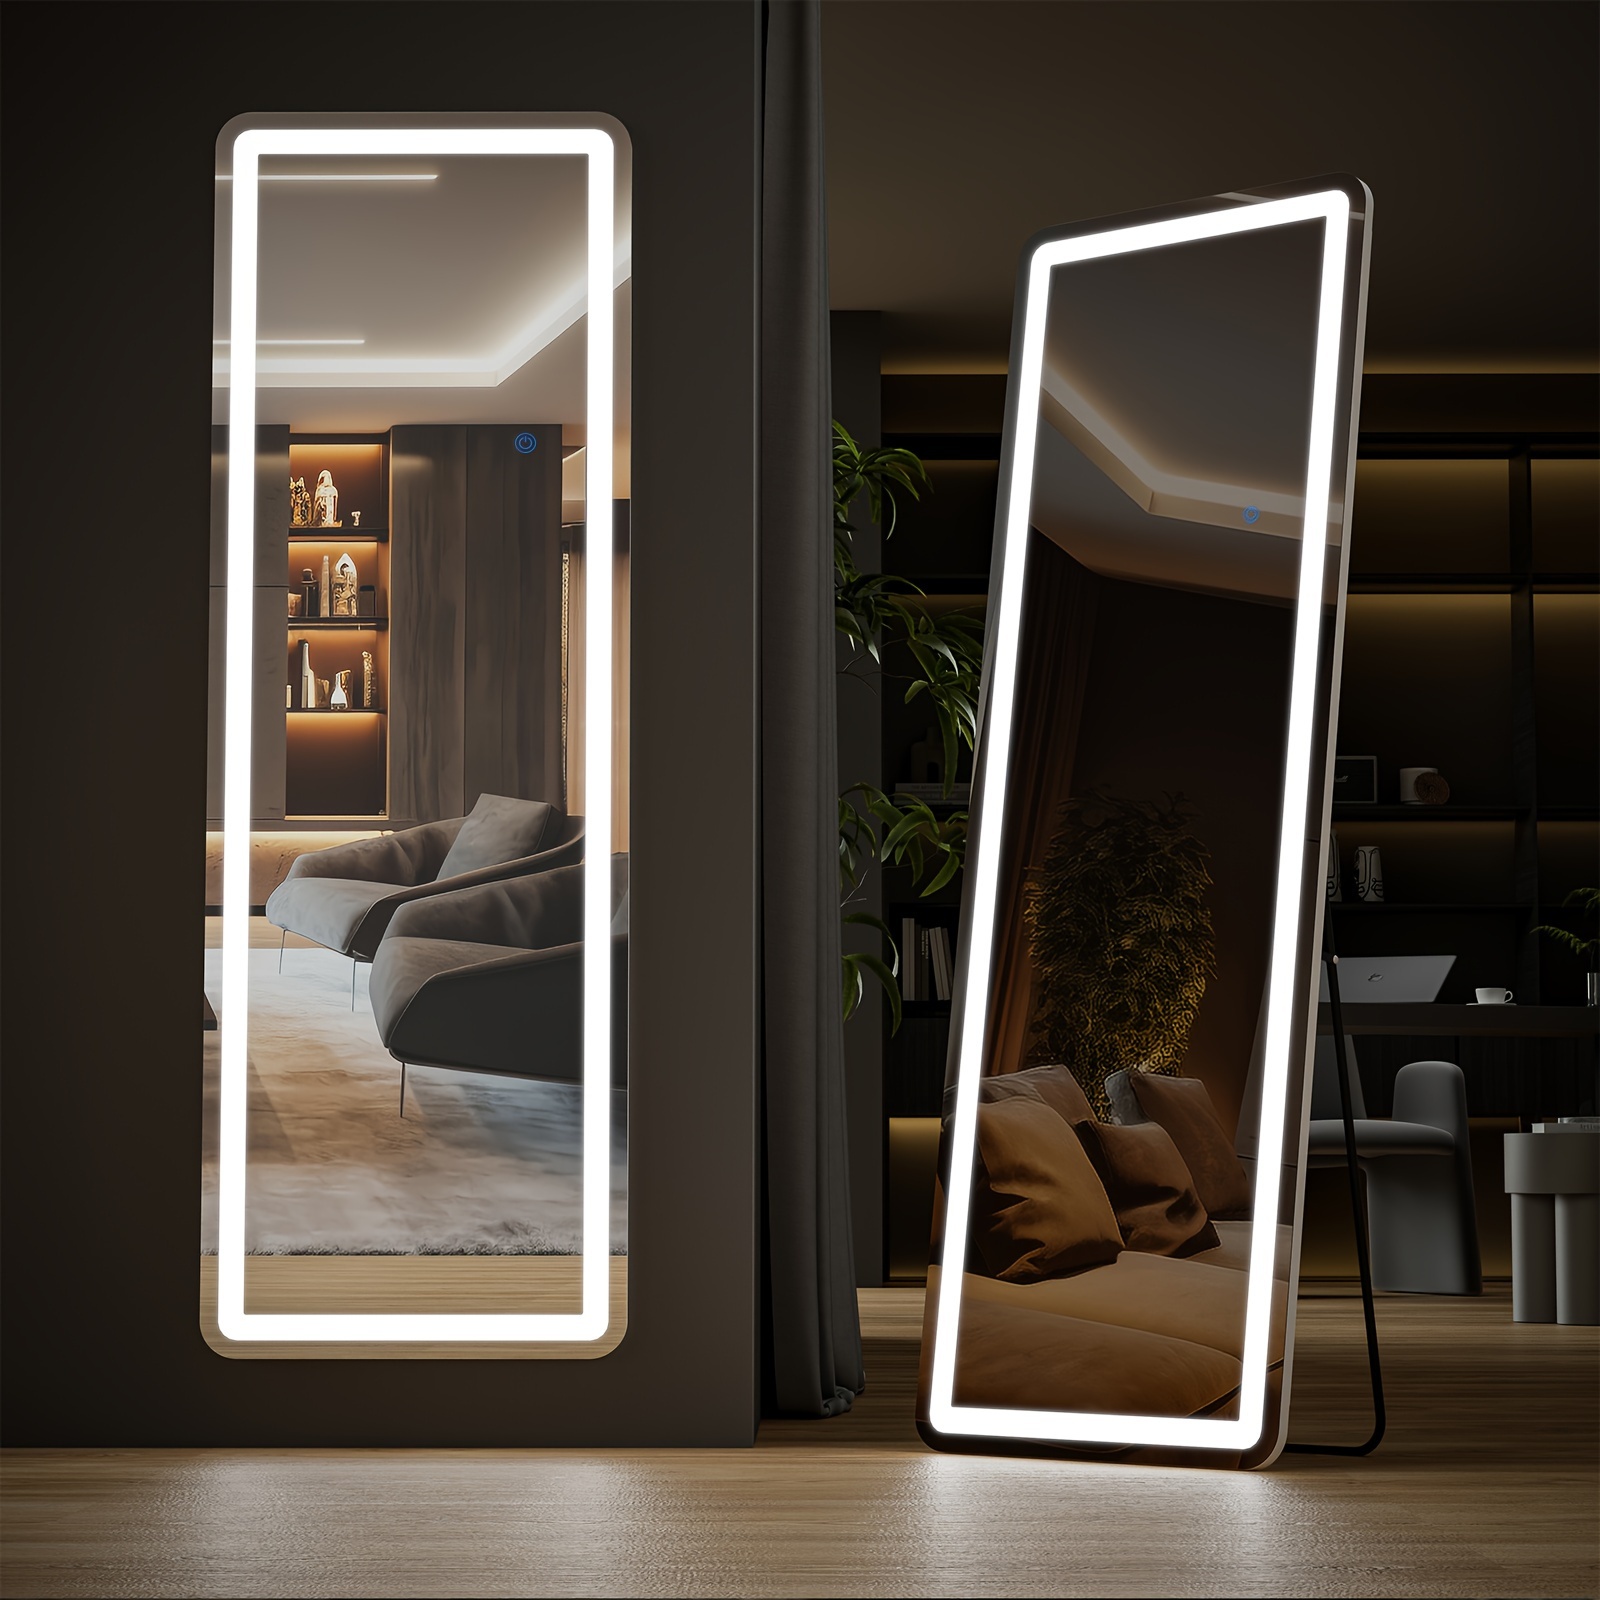 

Led Full Length Standing Mirror, Mirror With Led Lights, 64"x21" Wall Mirror Aluminum Alloy Thin Frame, 3 Color Lighting Hanging Or Leaning For Wall